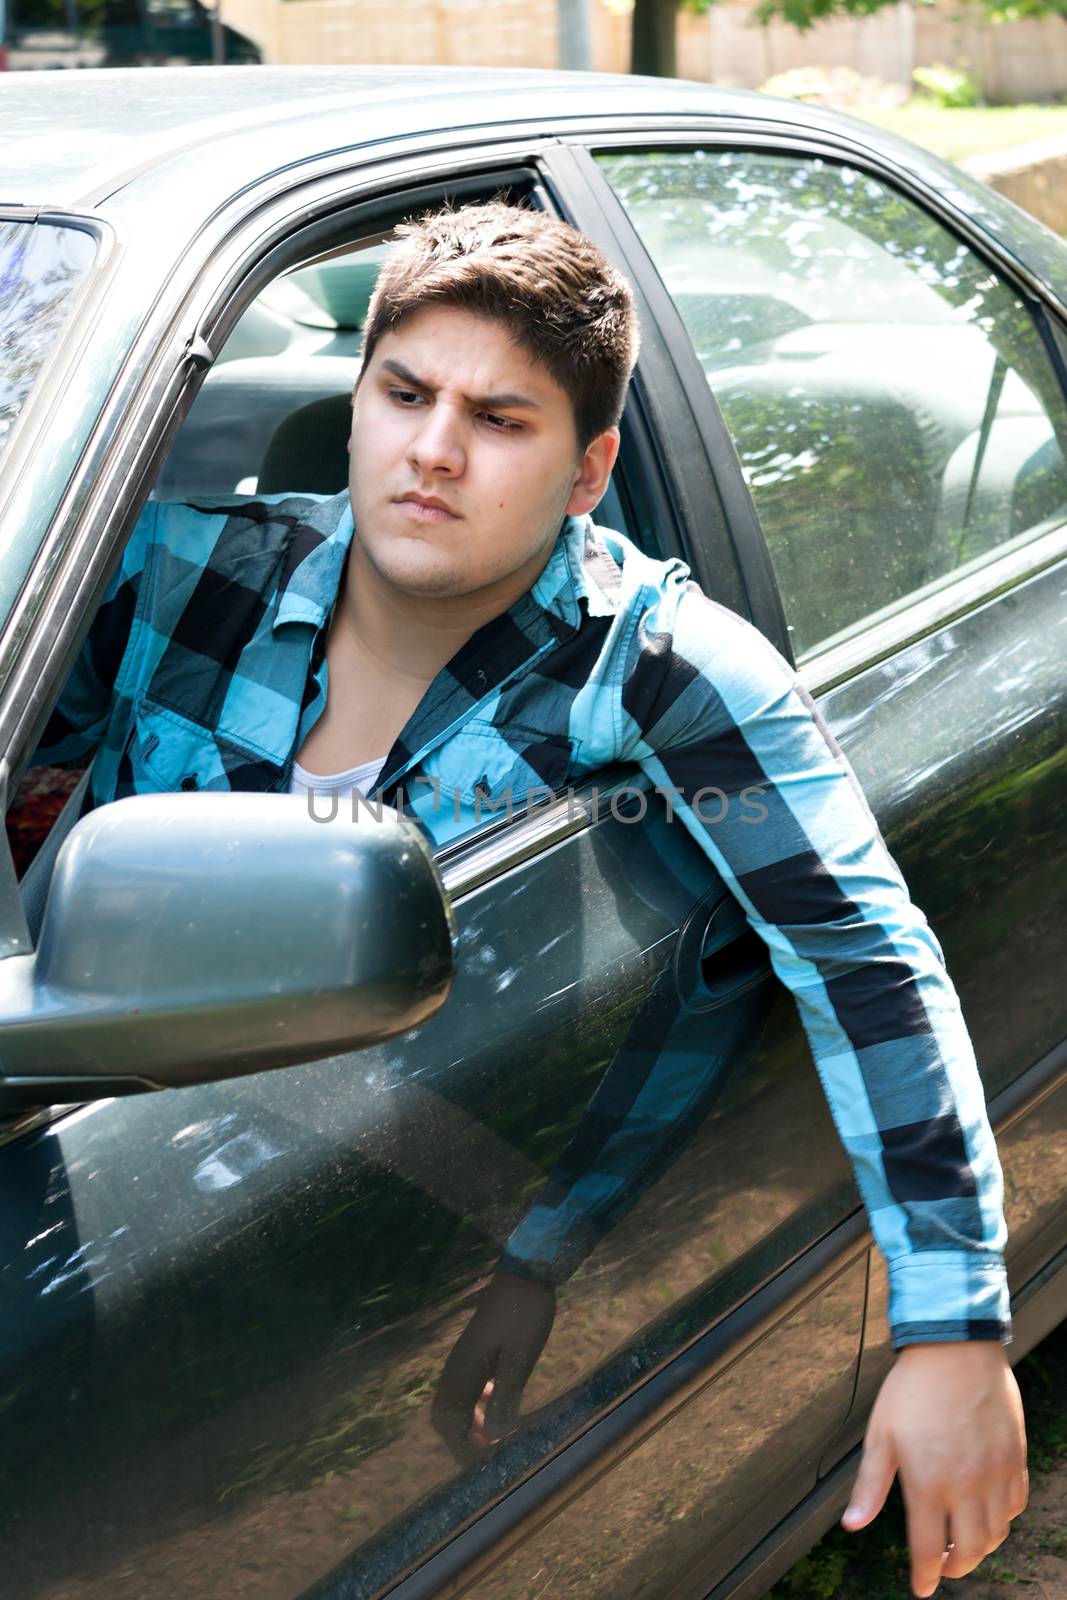 An irritated young man driving a vehicle with his head and arm hanging out of the window.